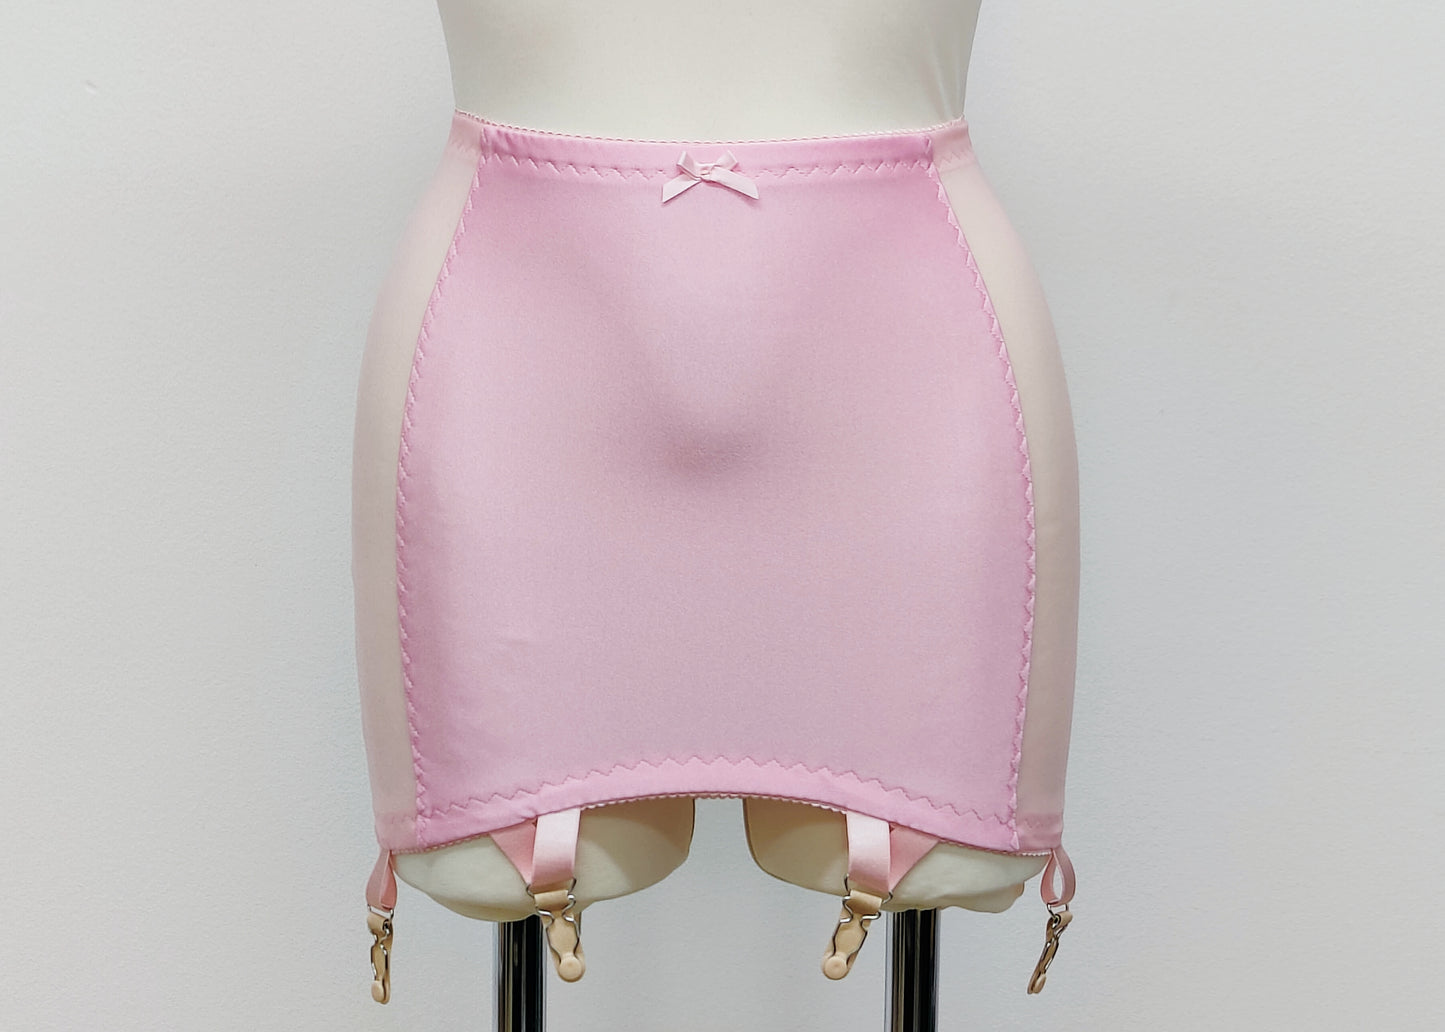 Black White Beige Pink Pull On RUBY Open Bottom Girdle size S-3XL